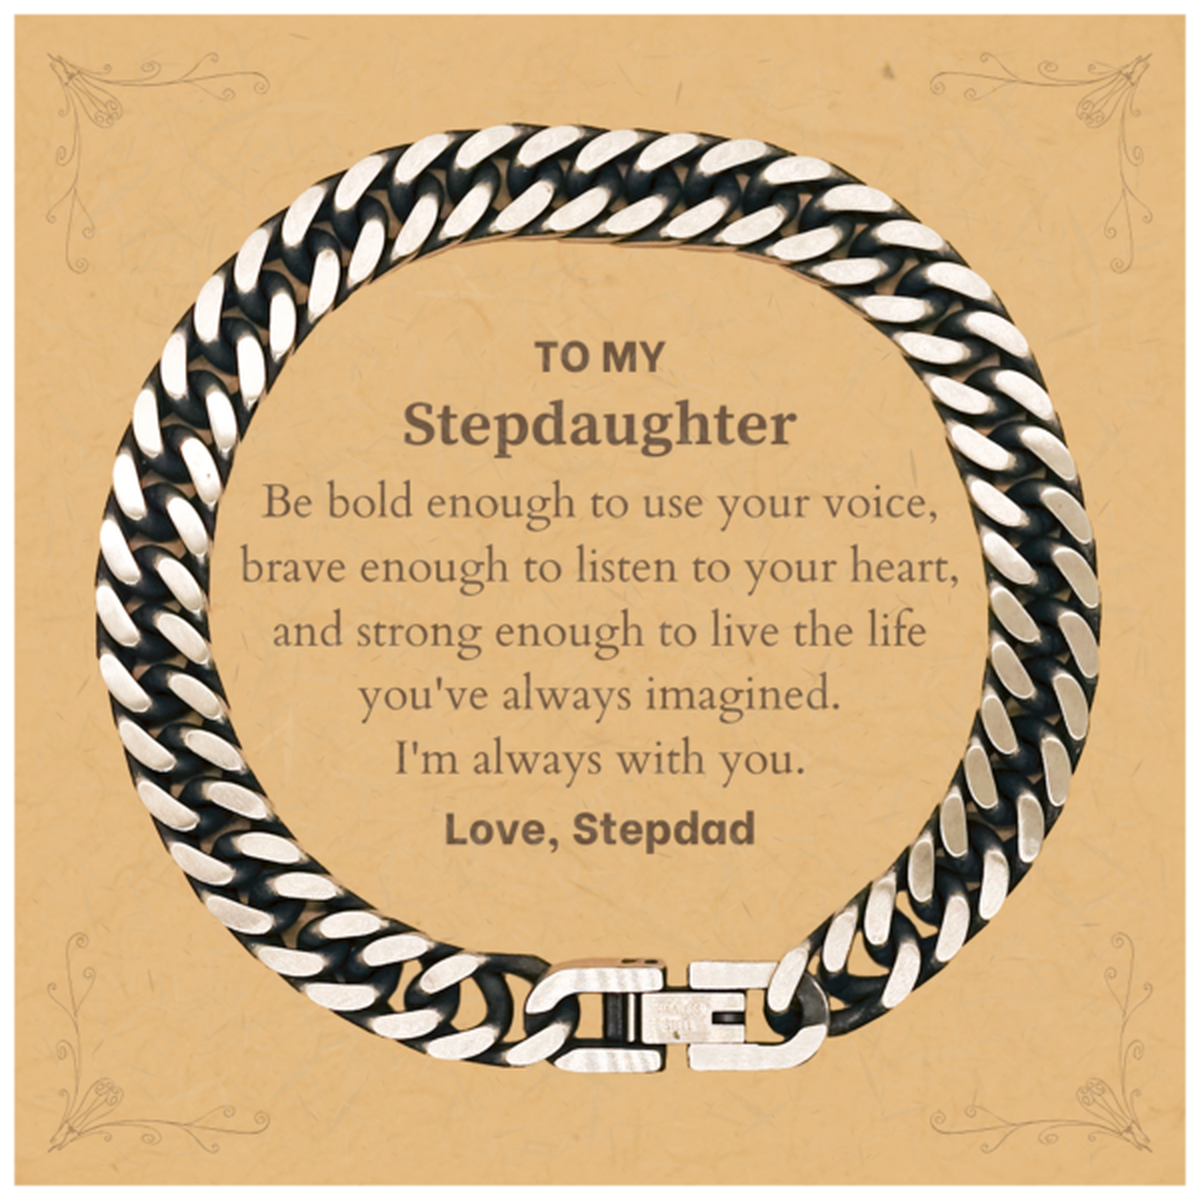 Keepsake Stepdaughter Cuban Link Chain Bracelet Gift Idea Graduation Christmas Birthday Stepdaughter from Stepdad, Stepdaughter Be bold enough to use your voice, brave enough to listen to your heart. Love, Stepdad